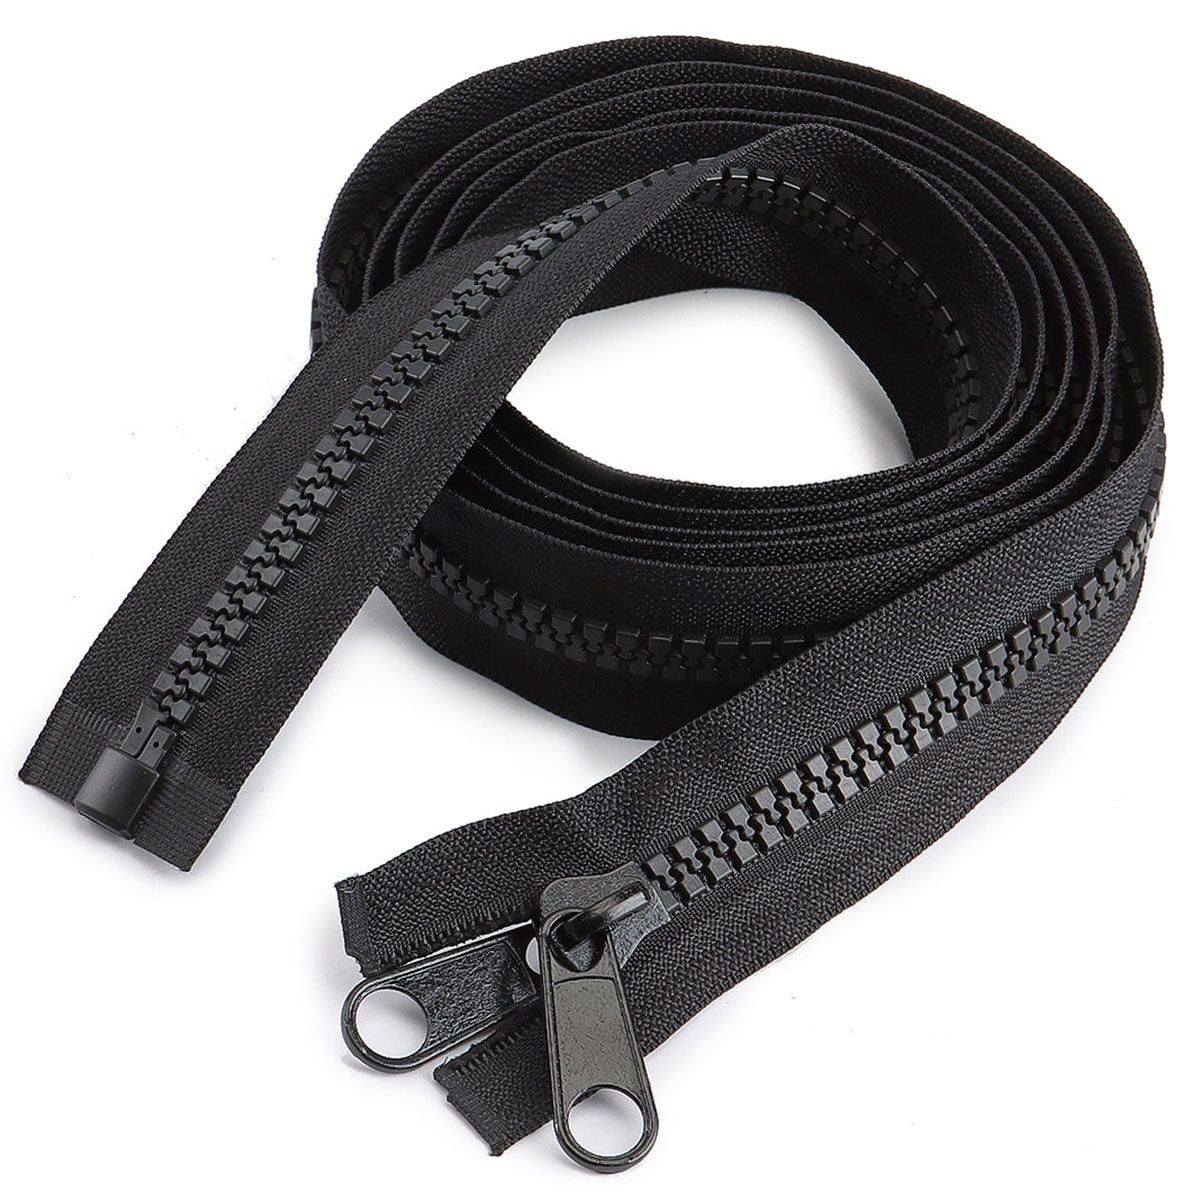 5 Heavy Duty Zipper Separating Plastic Zipper with Double Pull Tab